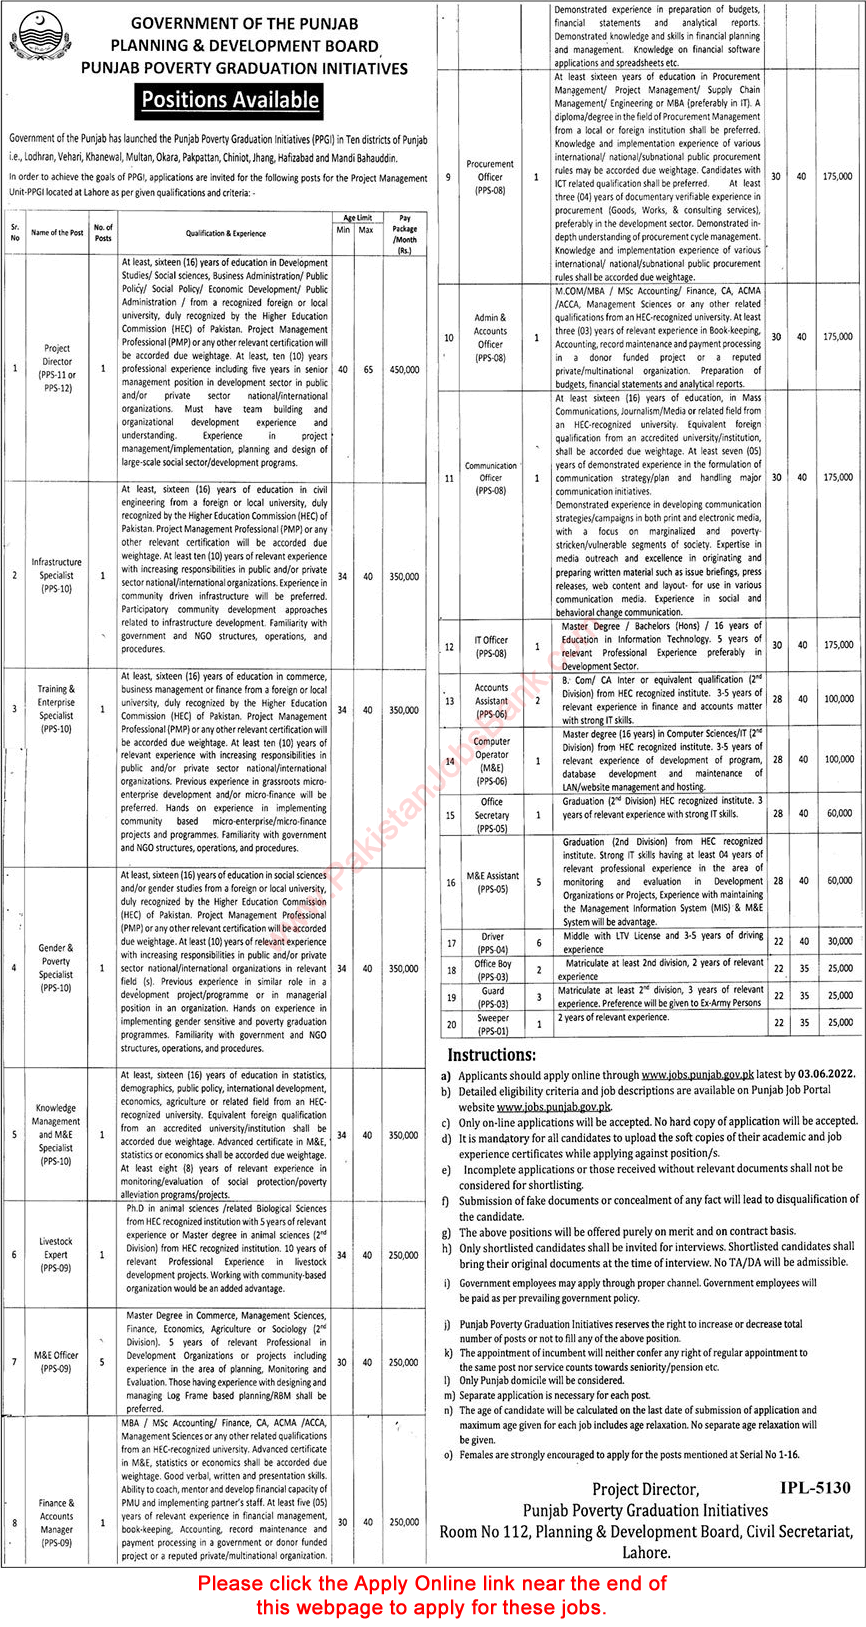 Planning and Development Board Punjab Jobs May 2022 Apply Online M&E Officers, Assistants & Others Latest